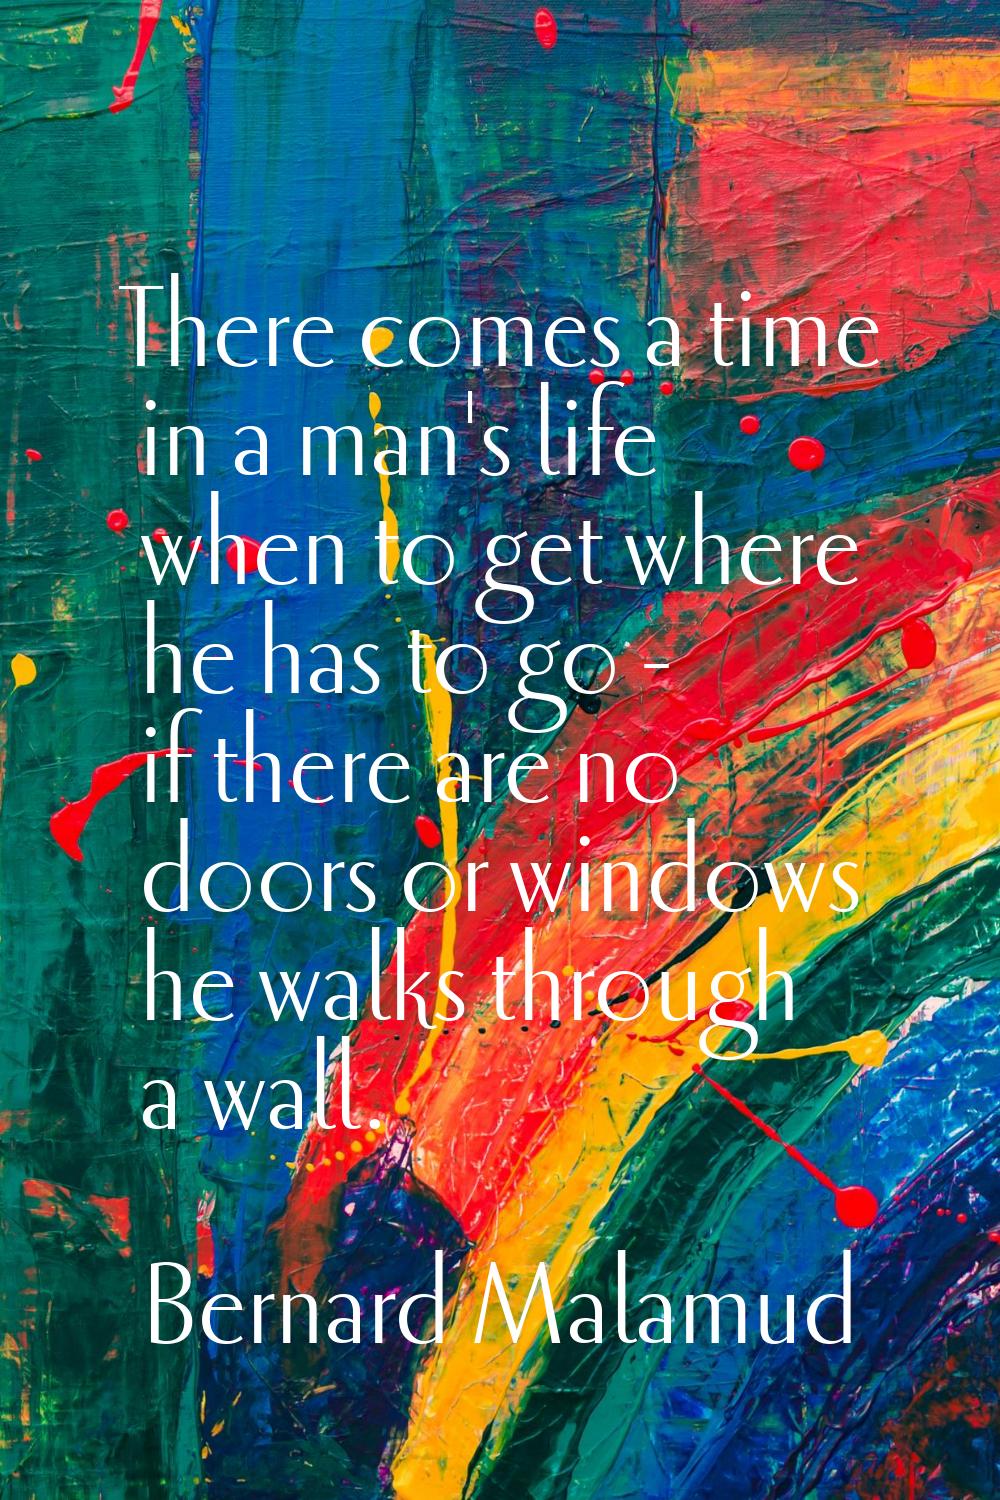 There comes a time in a man's life when to get where he has to go - if there are no doors or window